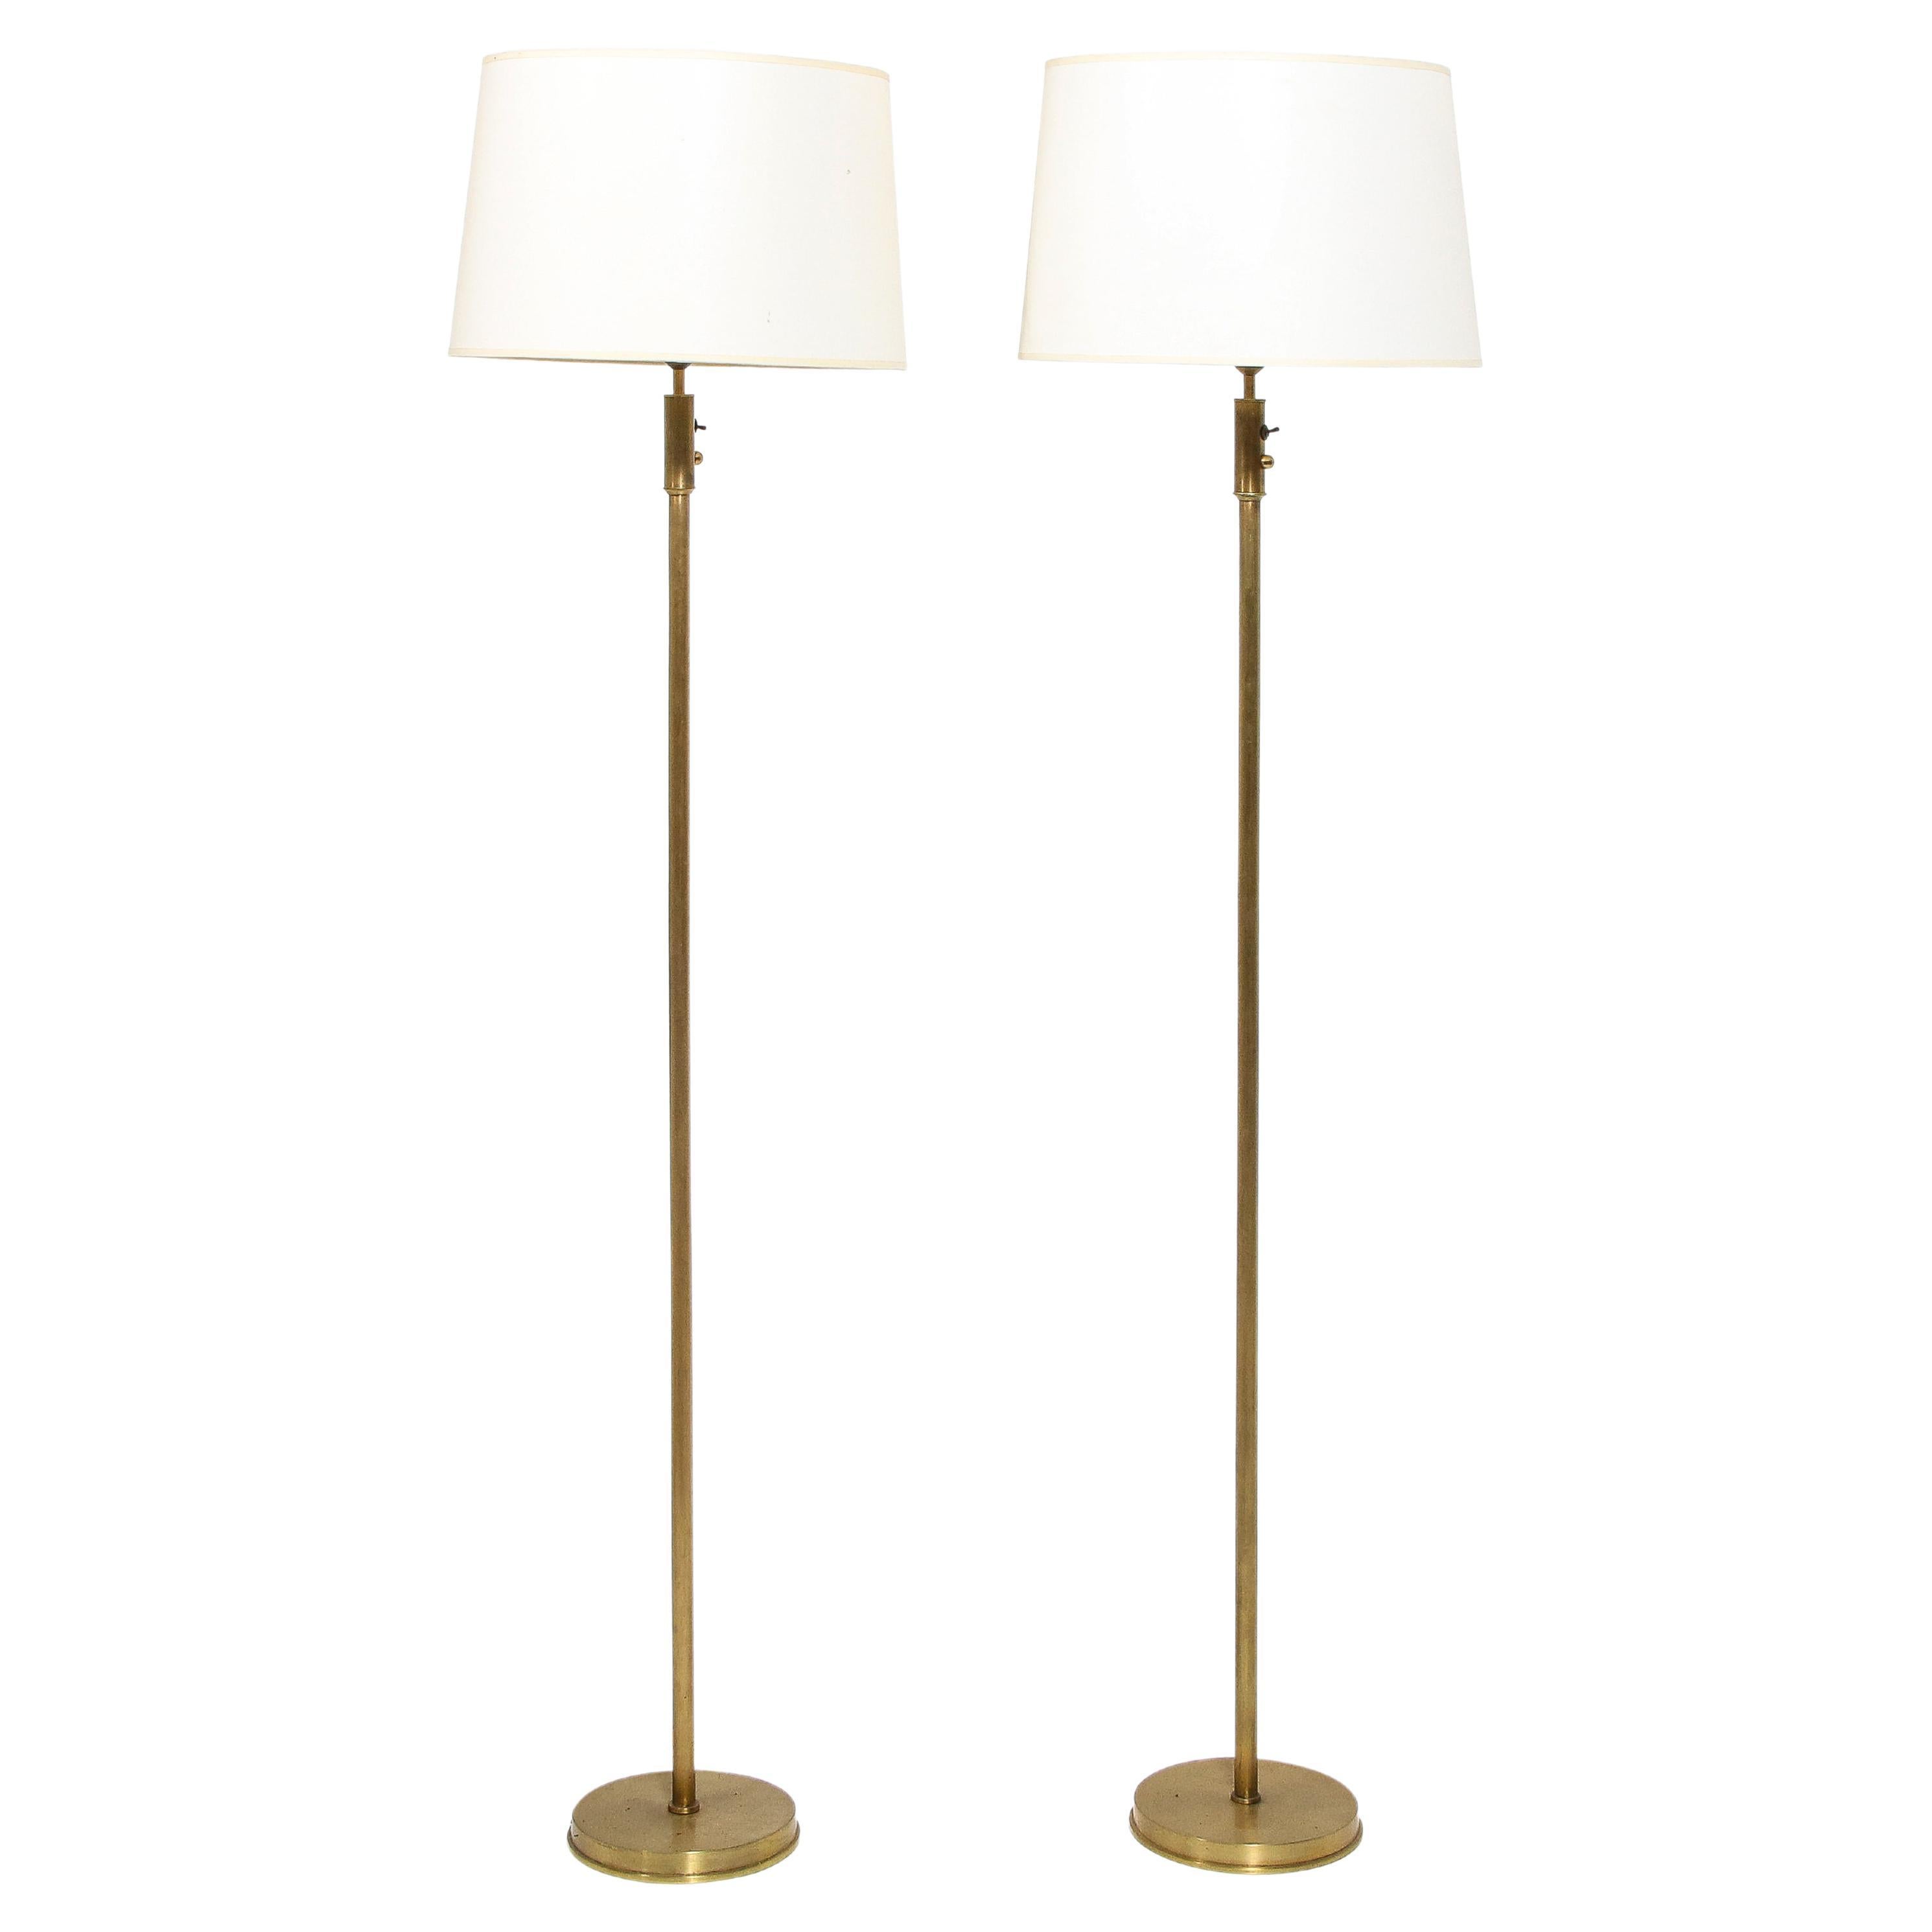 Pair of Brushed Brass Floor Lamps, France 1960's For Sale